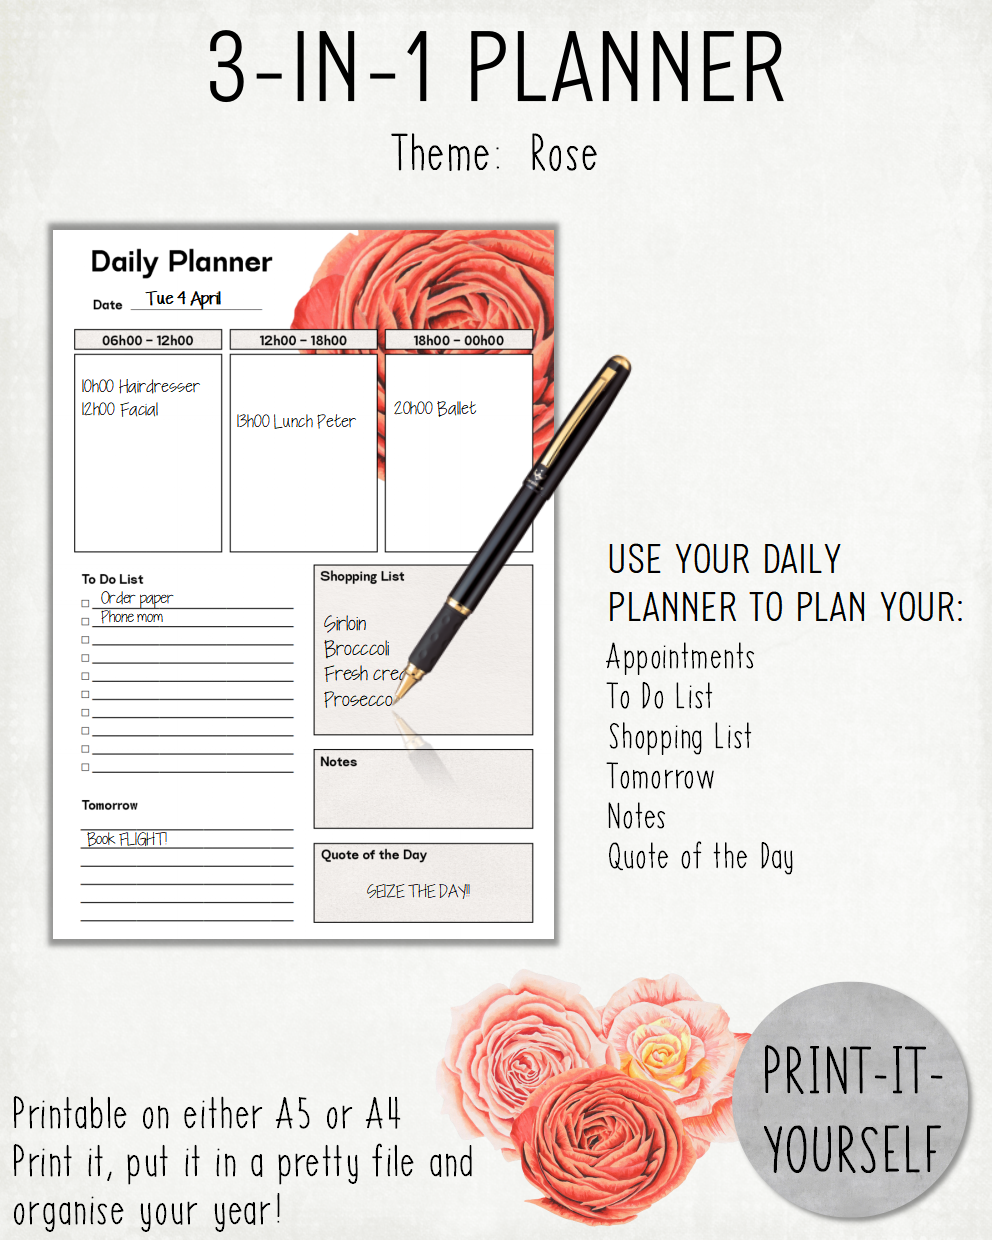 READY TO PRINT:  3-in-1 Planner - Rose